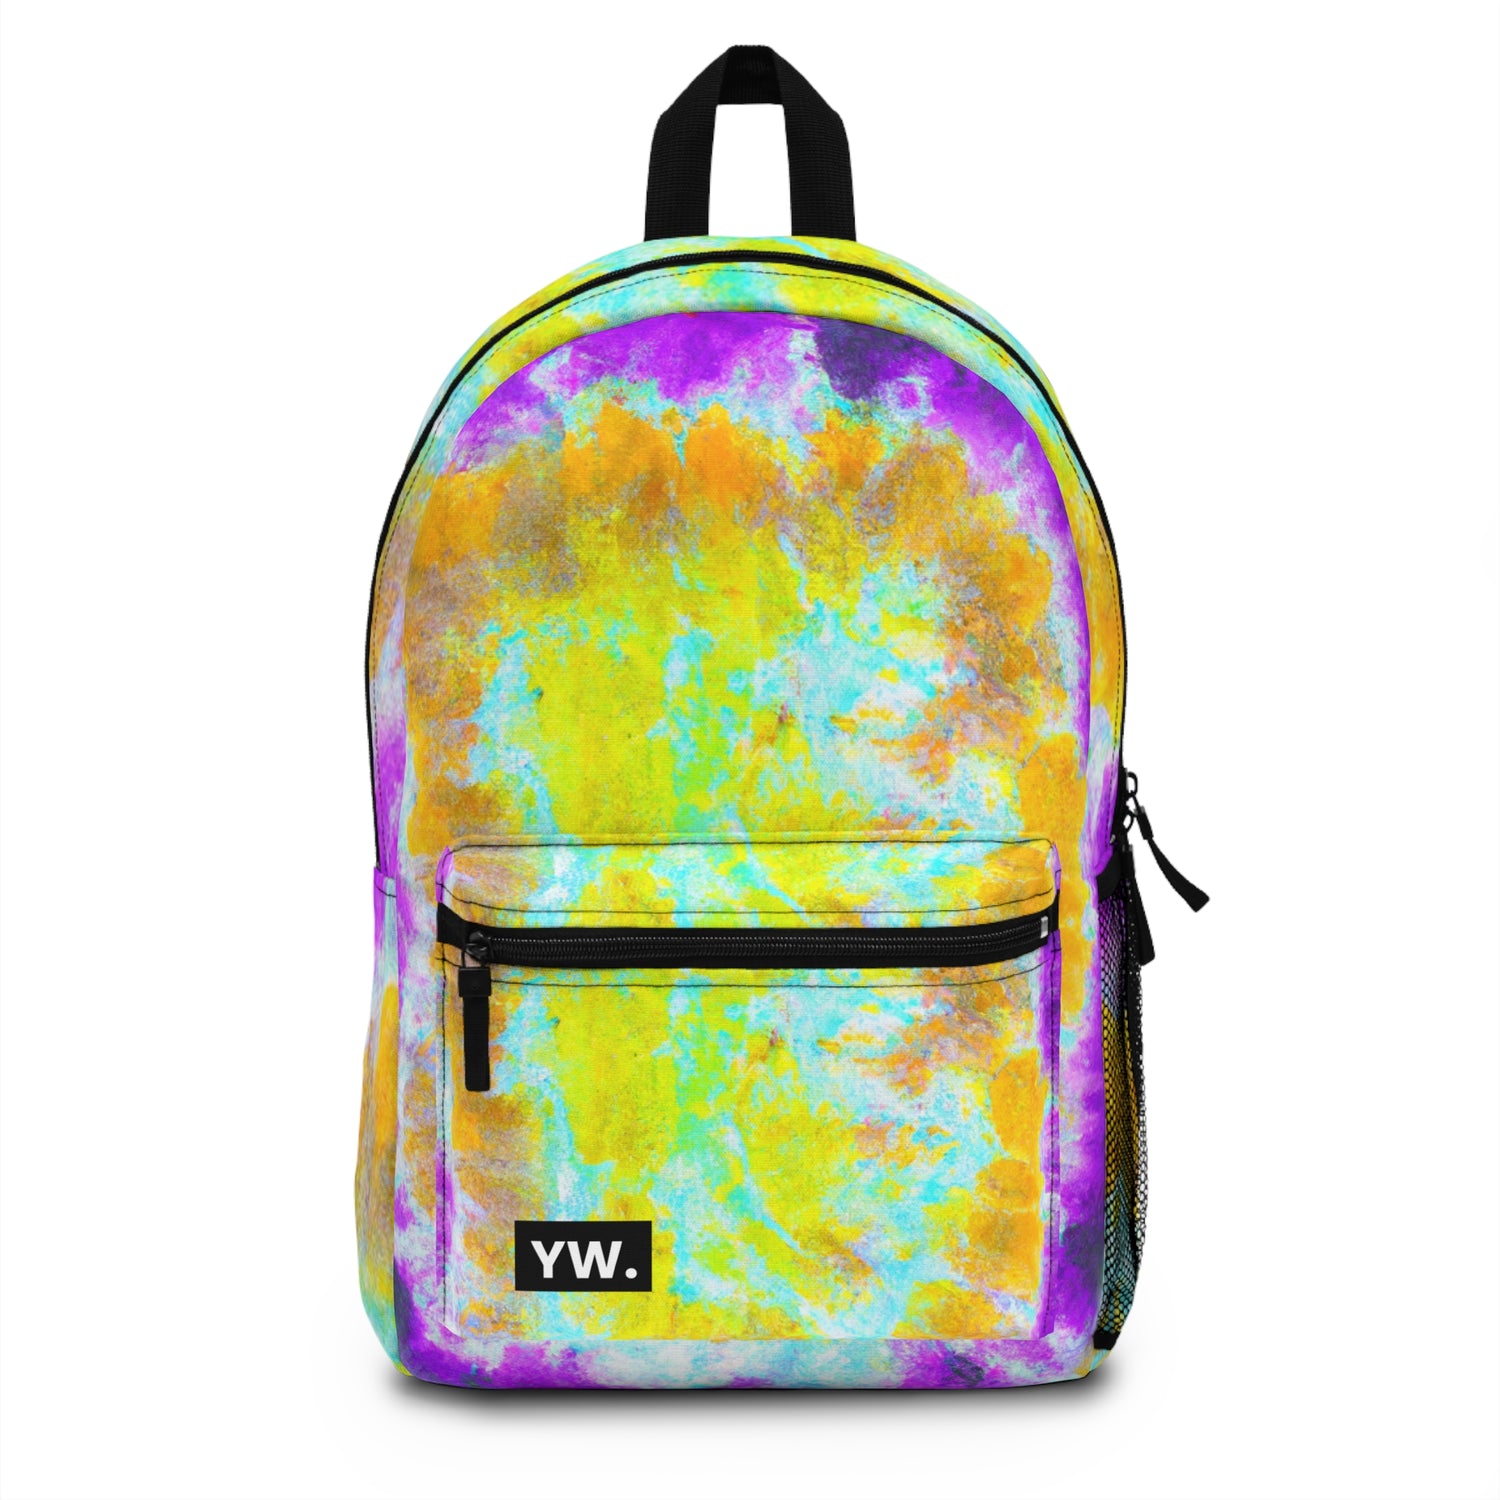 Trippidian Dustbelly Backpack